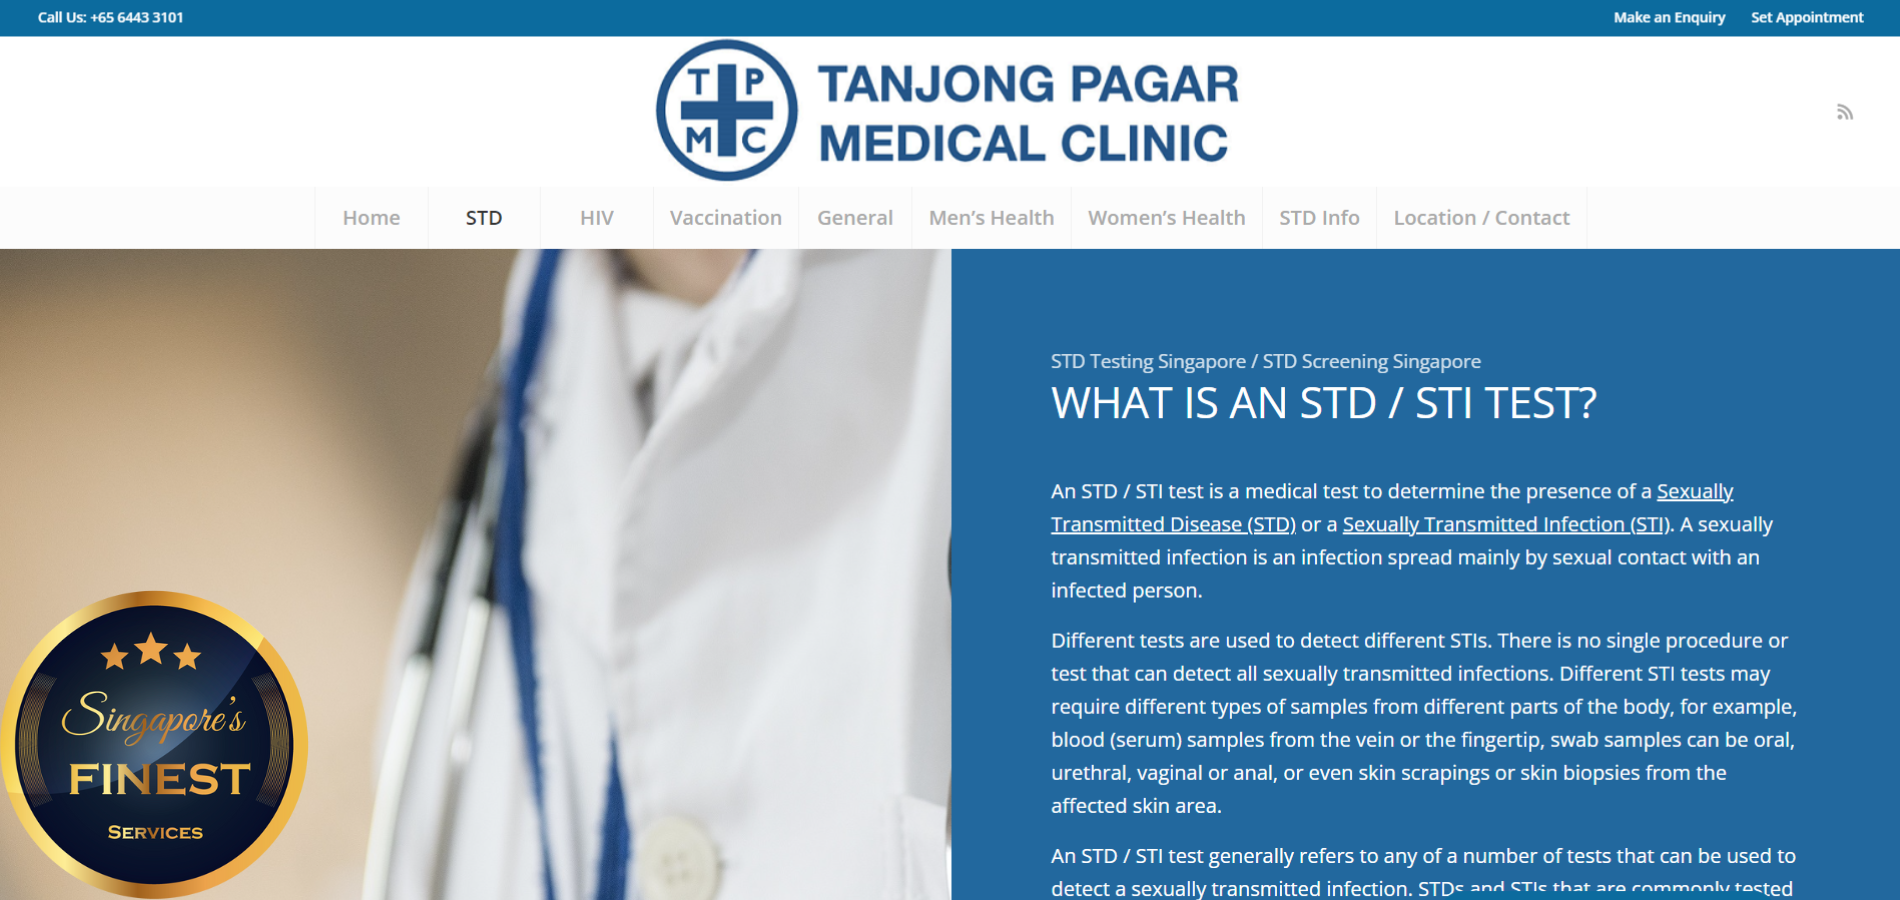 The Finest STD Testing Clinics in Singapore